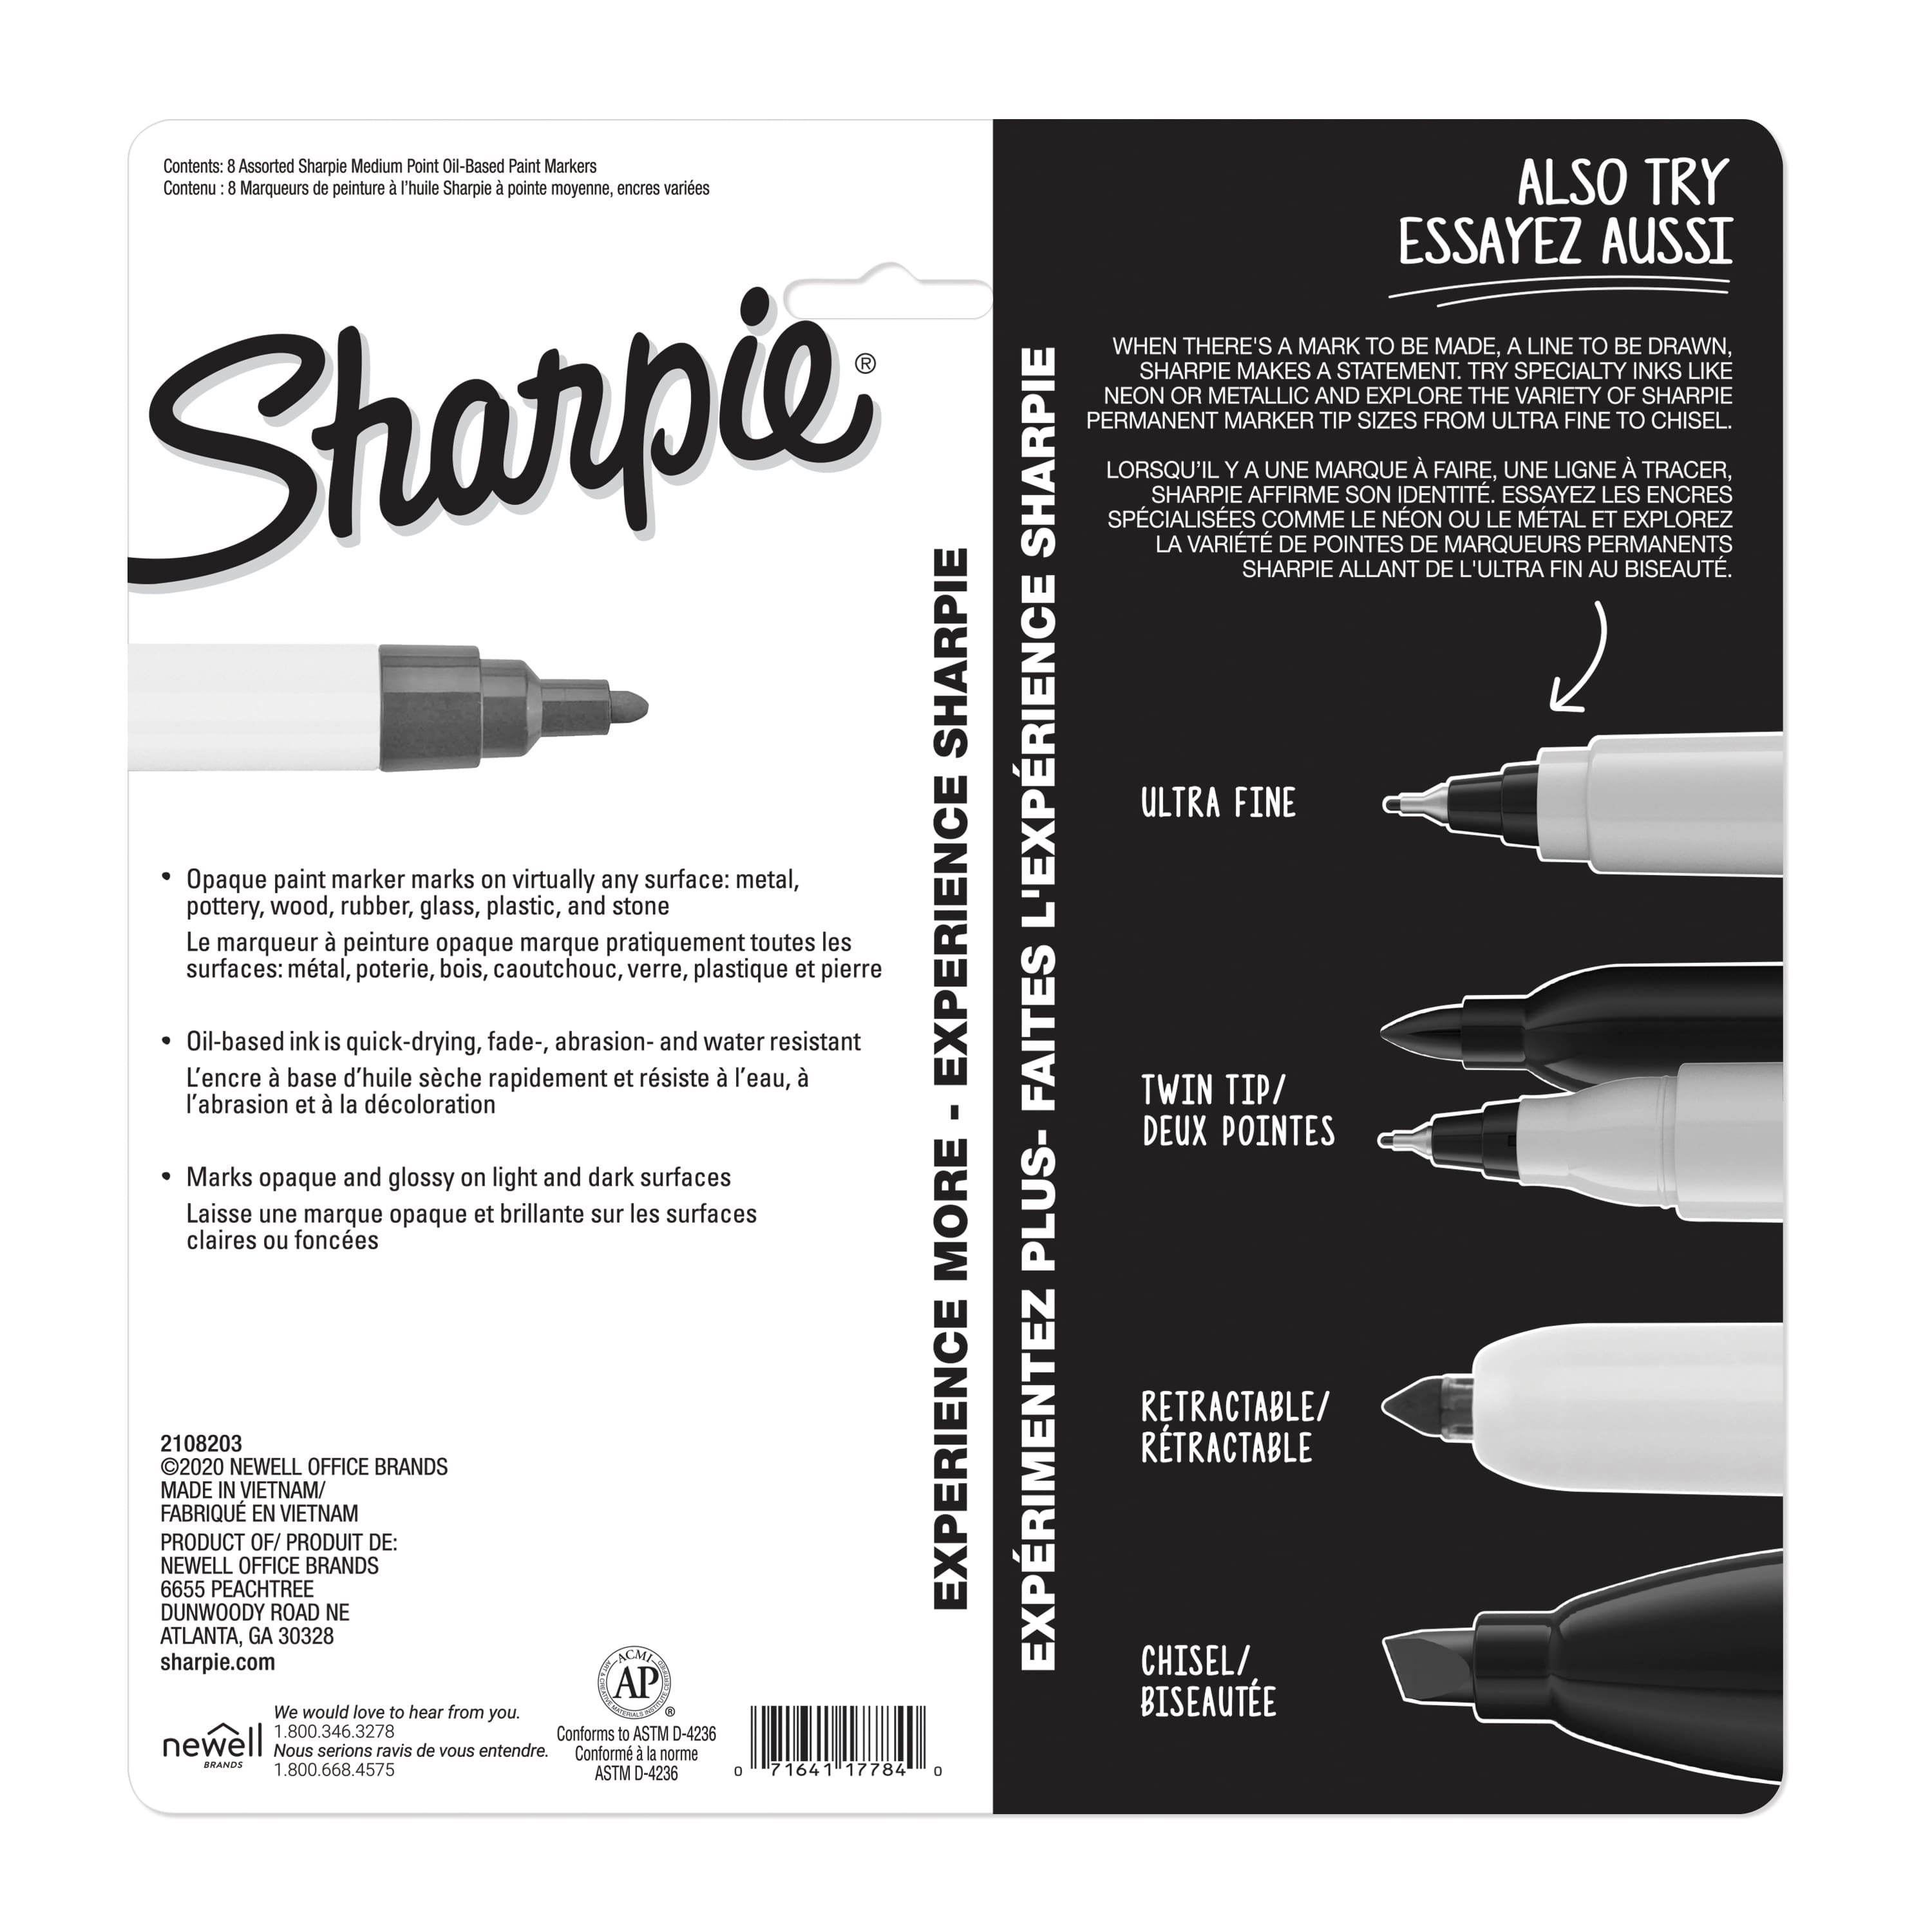 Sharpie Oil-Based Paint Markers, Full Set of 43 – Value Products